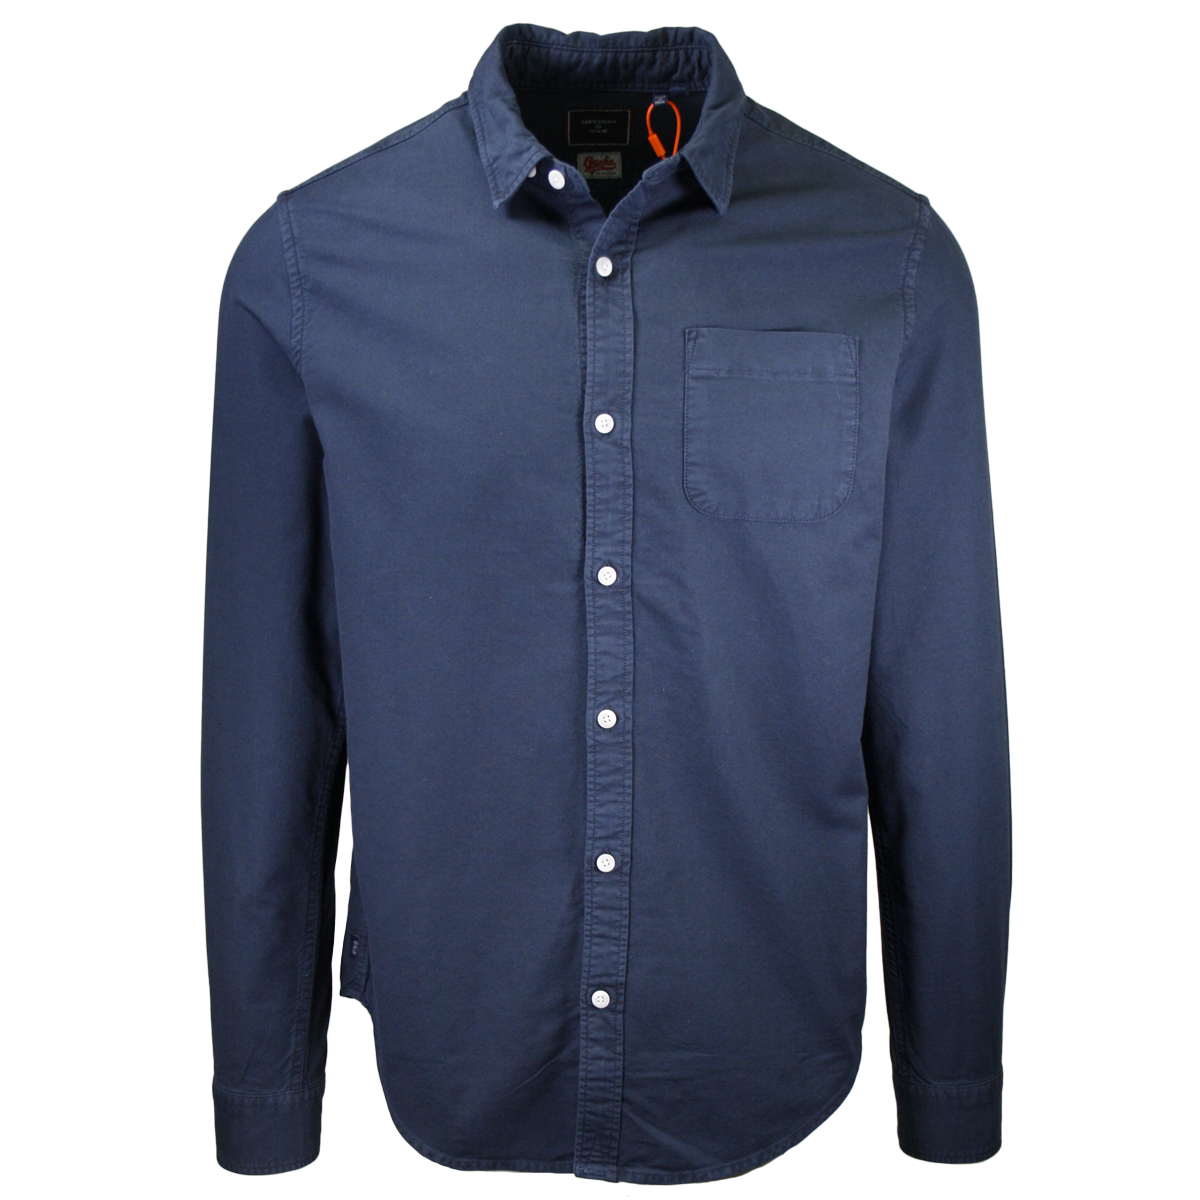 Superdry Men's Indigo Lined Dried Oxford L/S Woven Shirt